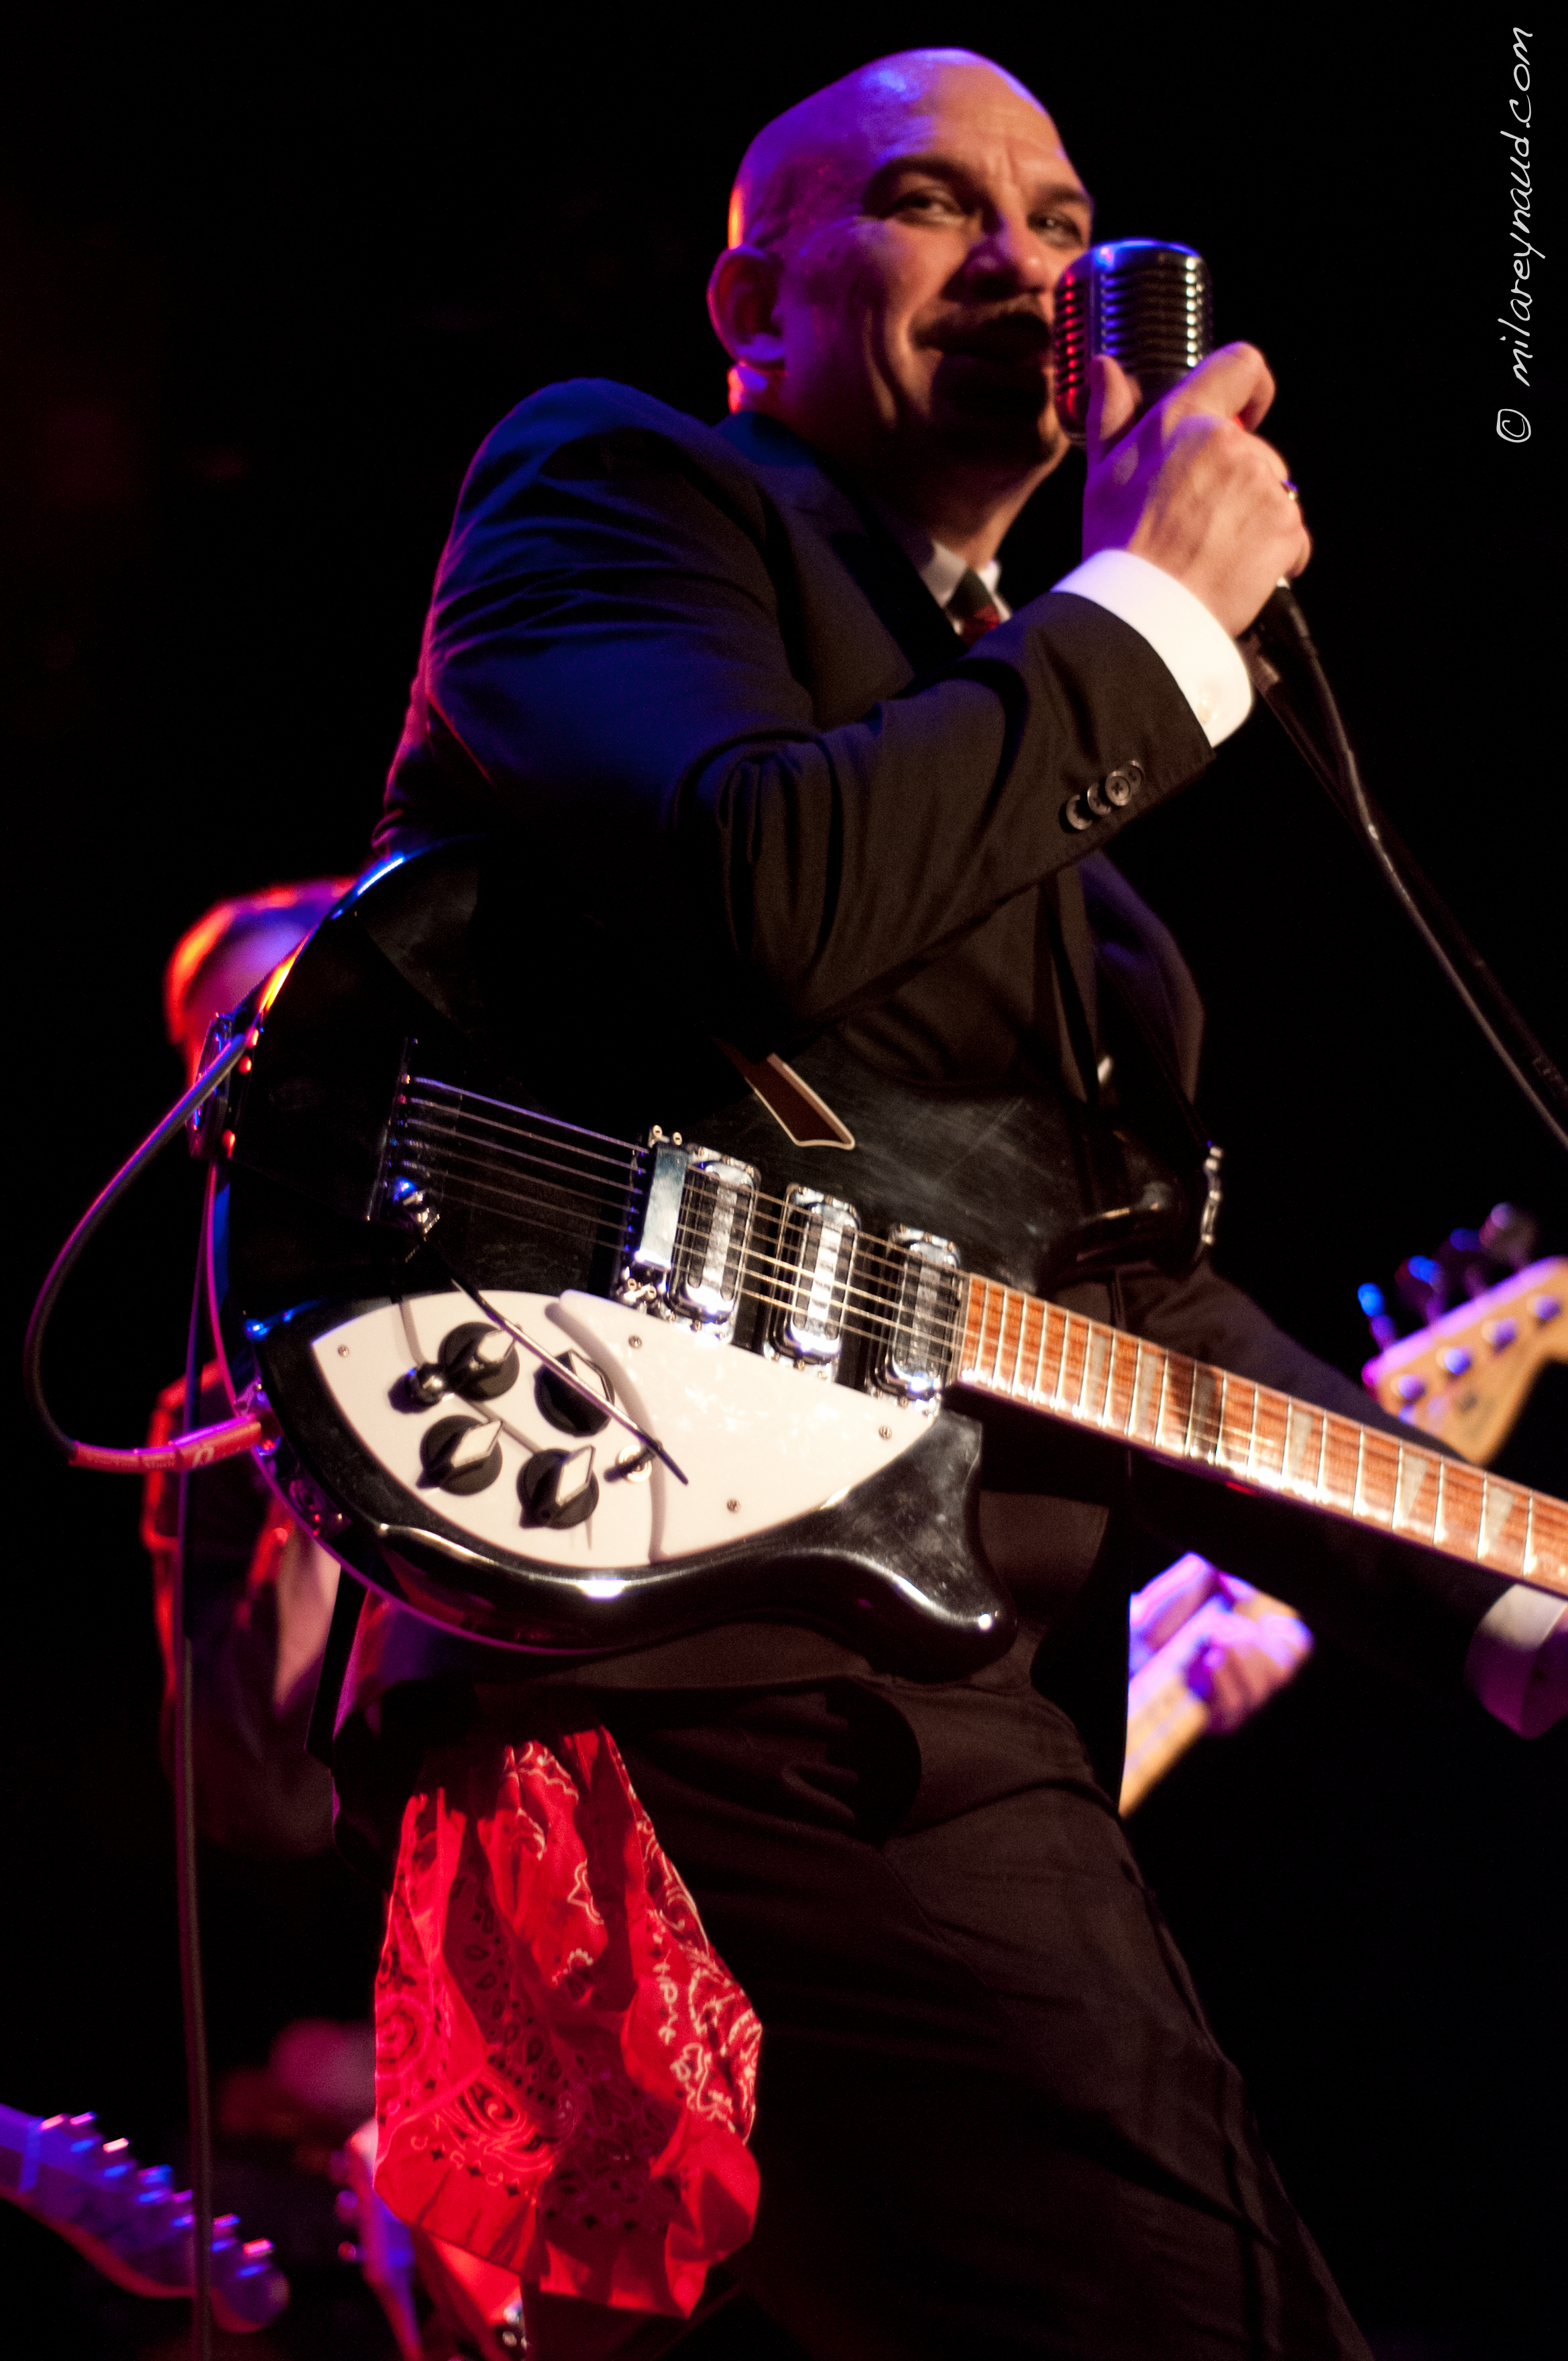 Sammy Busby performs with Dixie's Deceivers at The Whisky a Go Go in Hollywood with his custom Rickenbacker guitar.